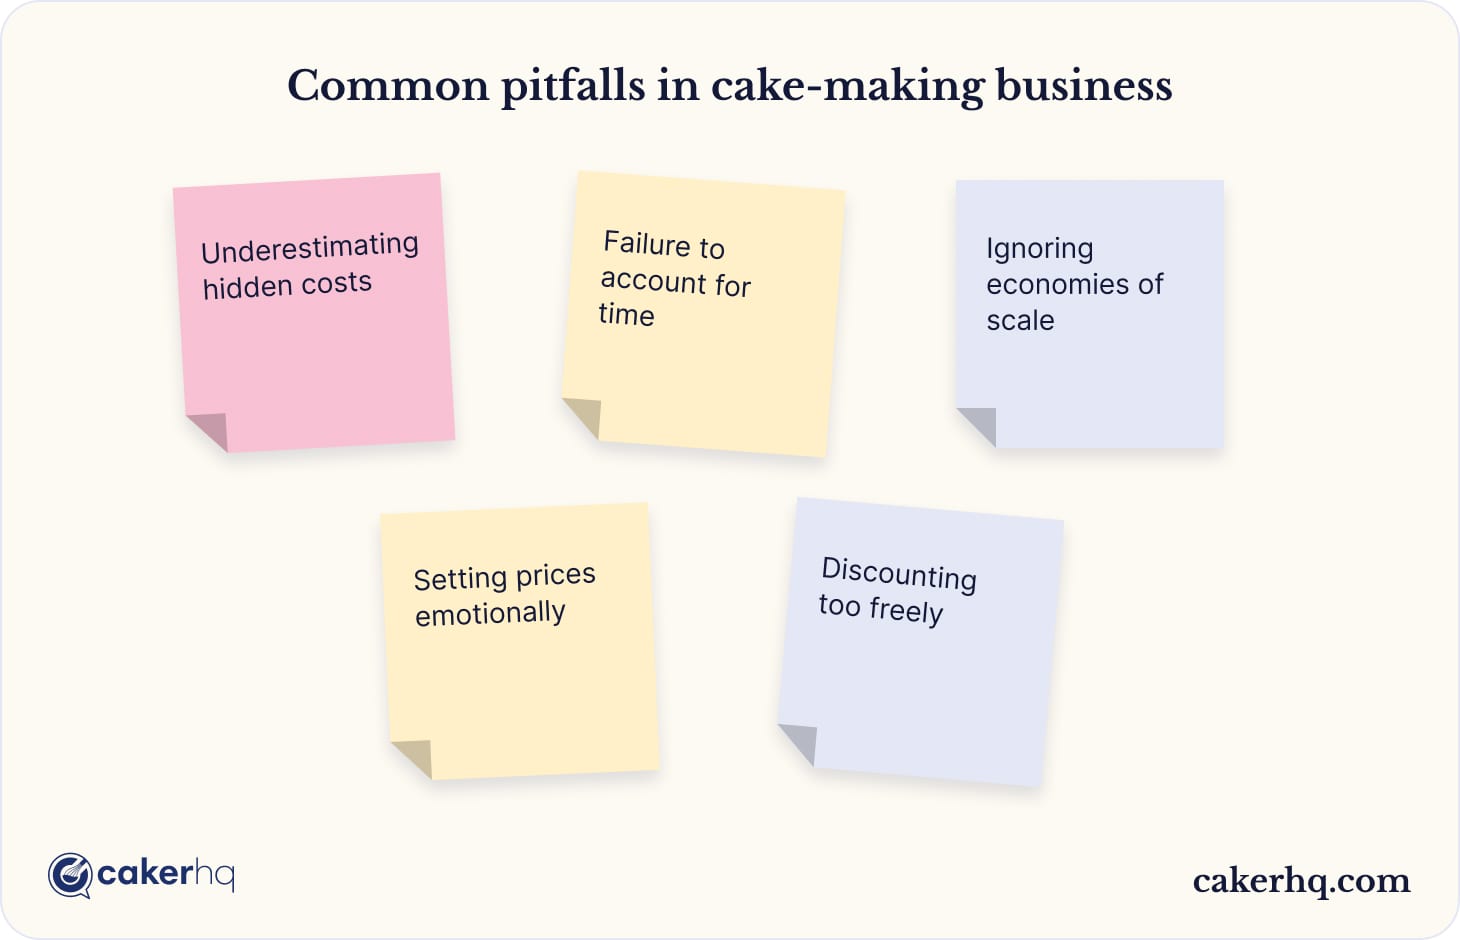 Widespread mistakes in cake-making business